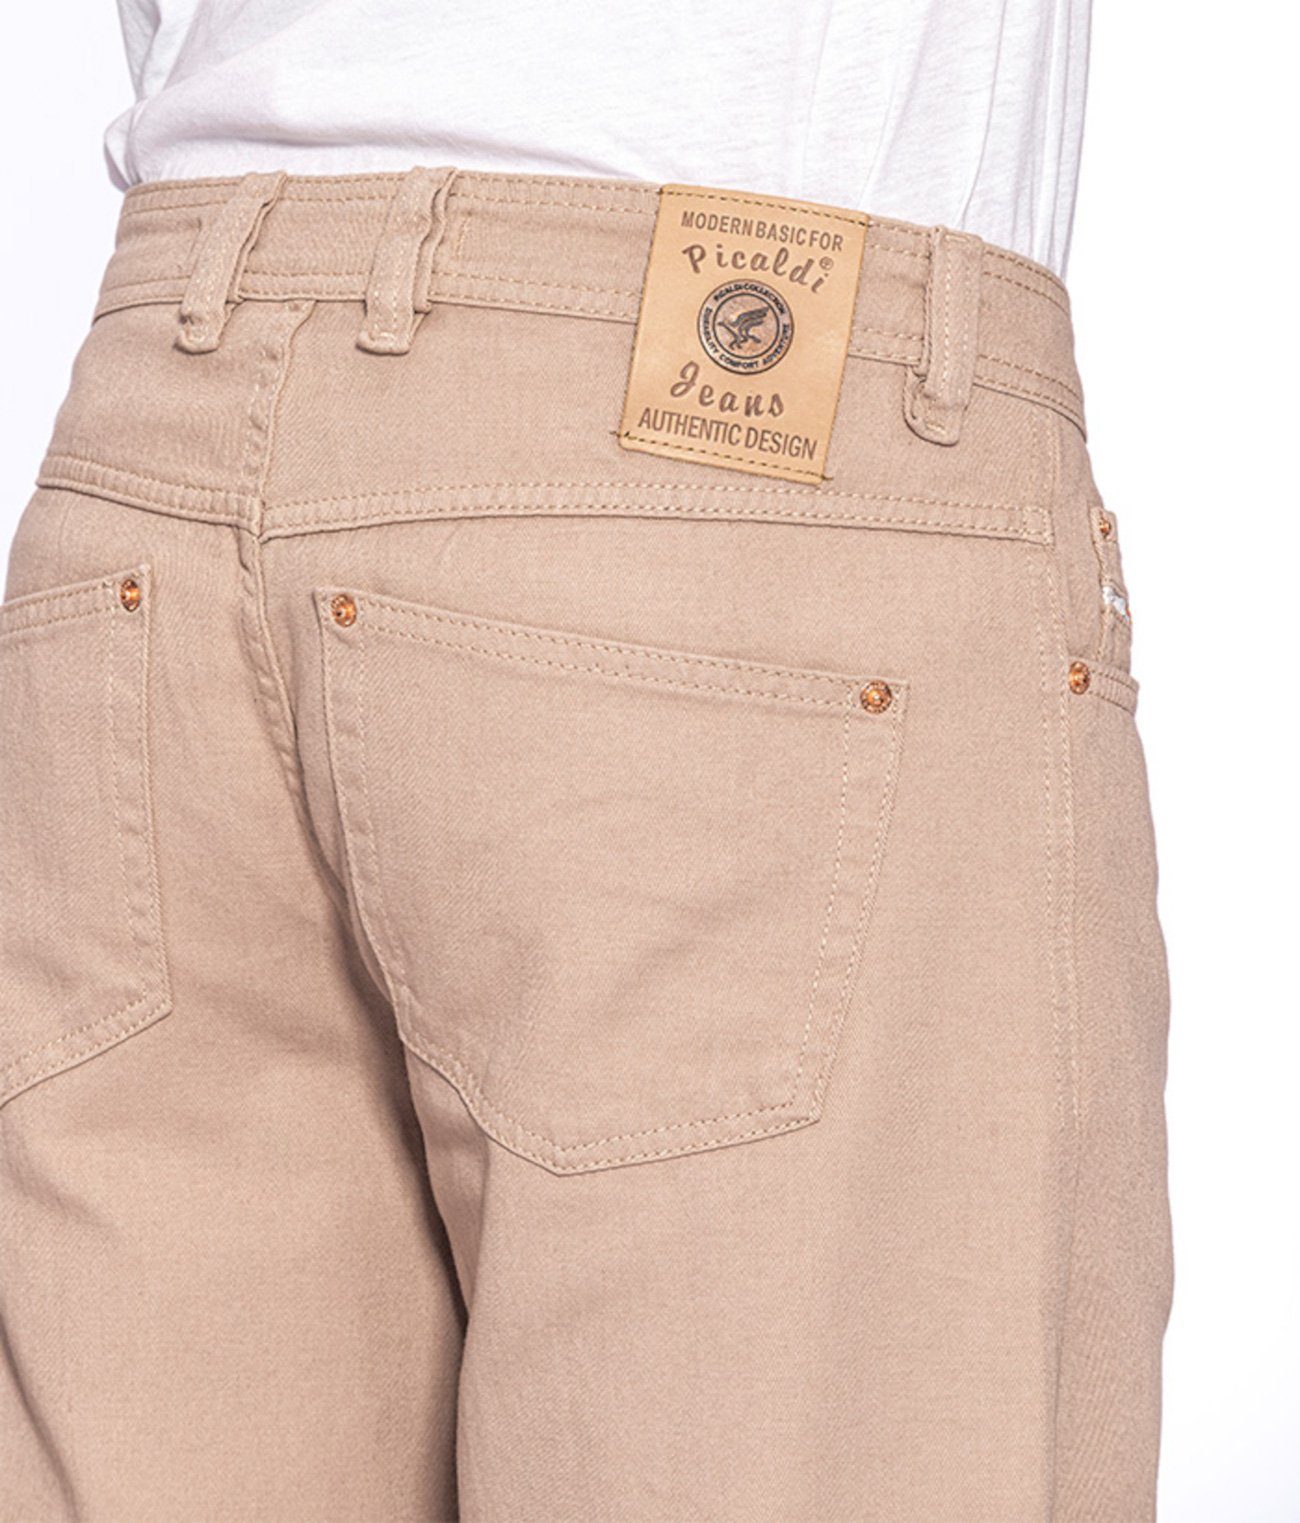 Tapered-fit-Jeans Zicco Fit, Sommerhose, Relaxed 472 Beige Jeans PICALDI Freizeithose Fit, Gabardine Loose